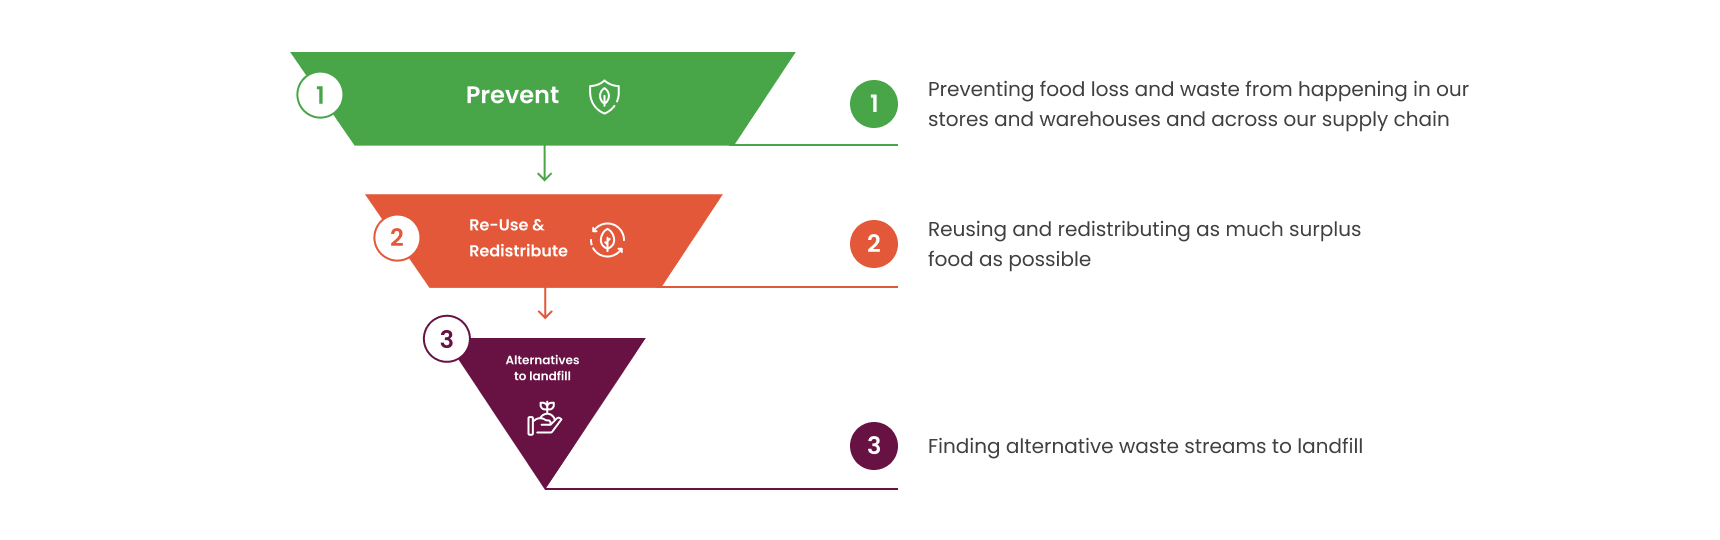 Preventing food loss and waste from happening in our stores and warehouses and across our supply chain